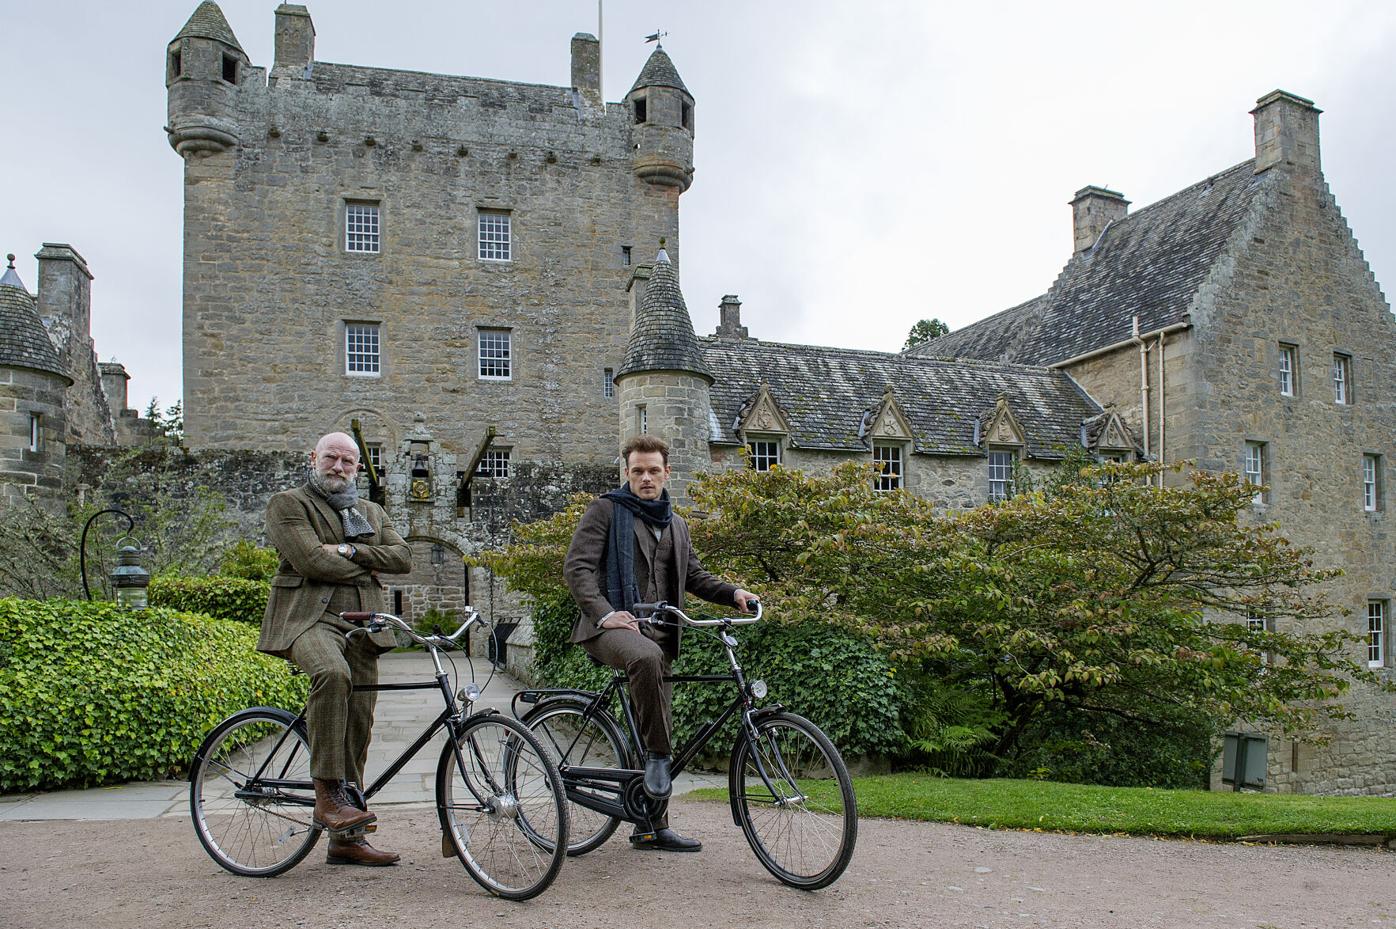 Men In Kilts: A Road Trip with Sam and Graham Season 1 2020